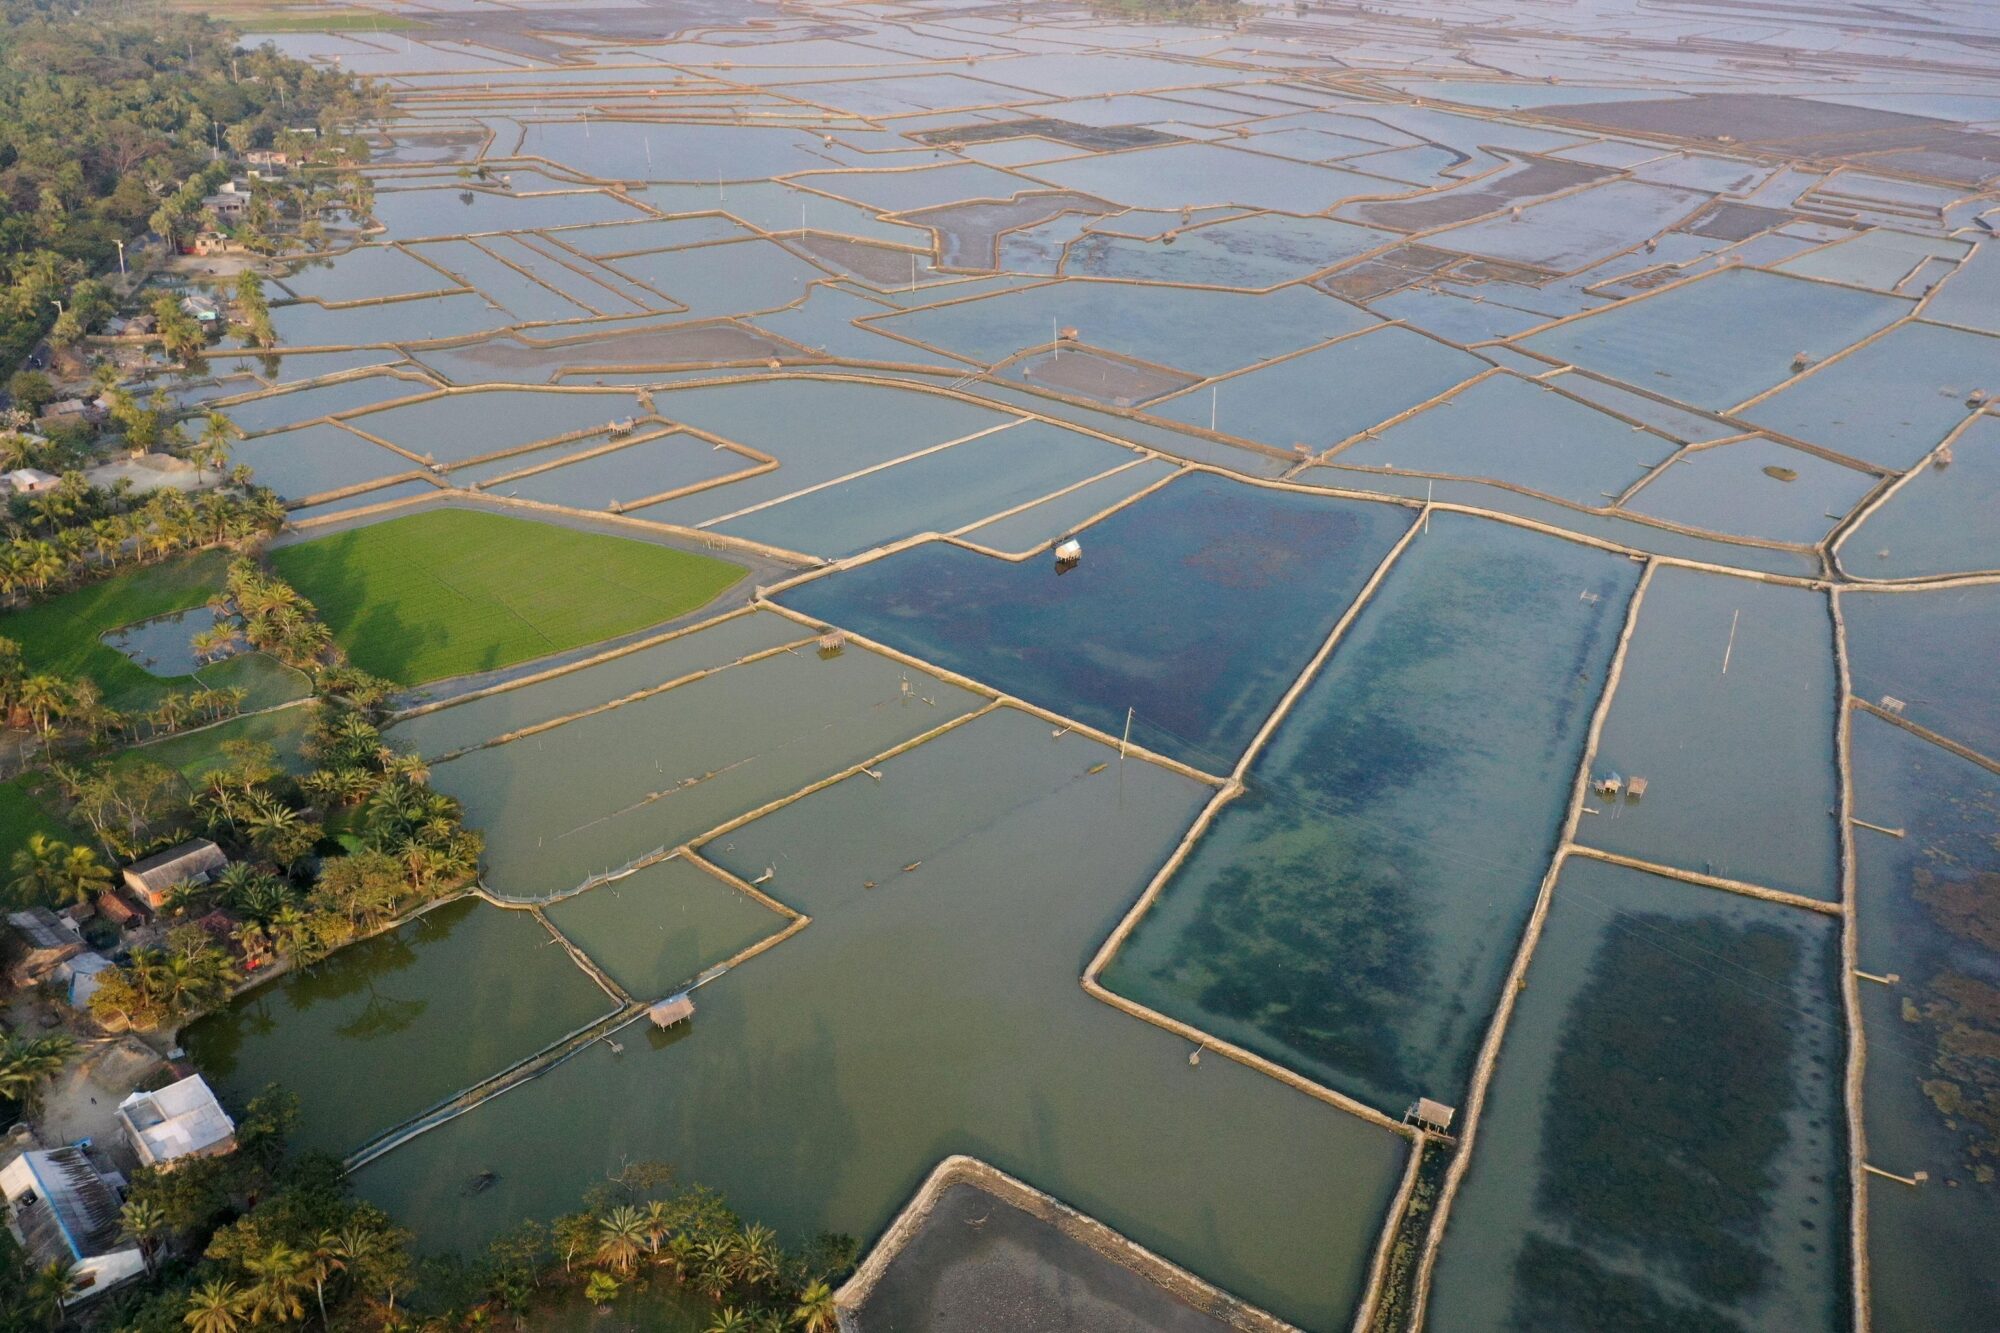 Enclosures for shrimp farms have been created across huge coastal areas of Khulna district, Bangladesh 